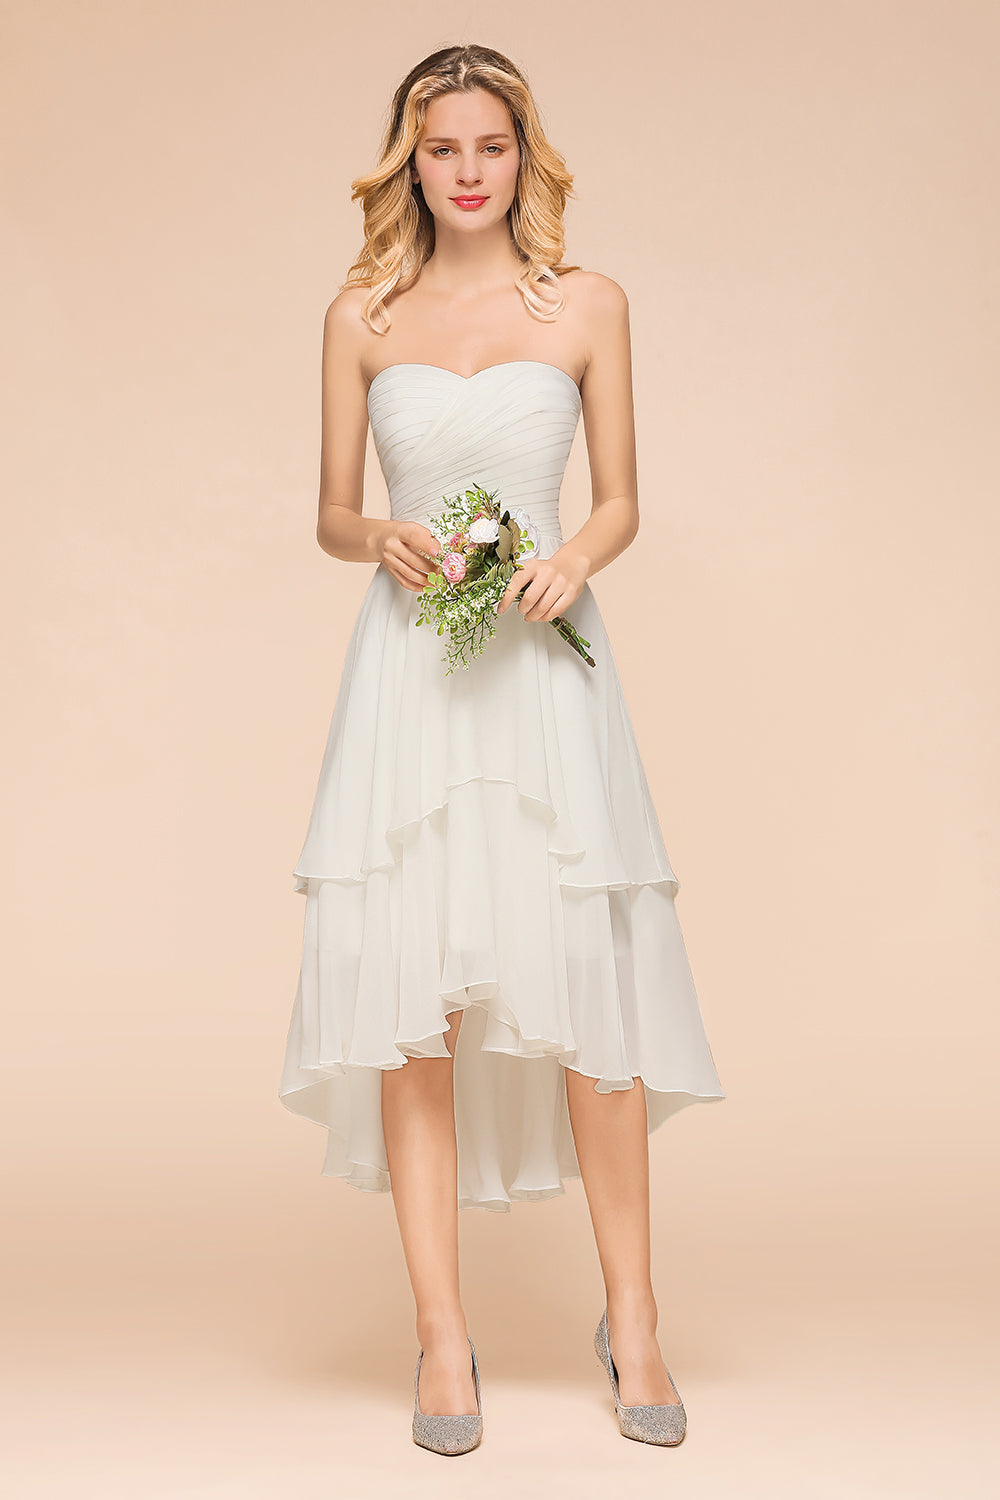 Affordable Hi-Lo Layer Ruffle Ivory Short Bridesmaid Dress with Flower